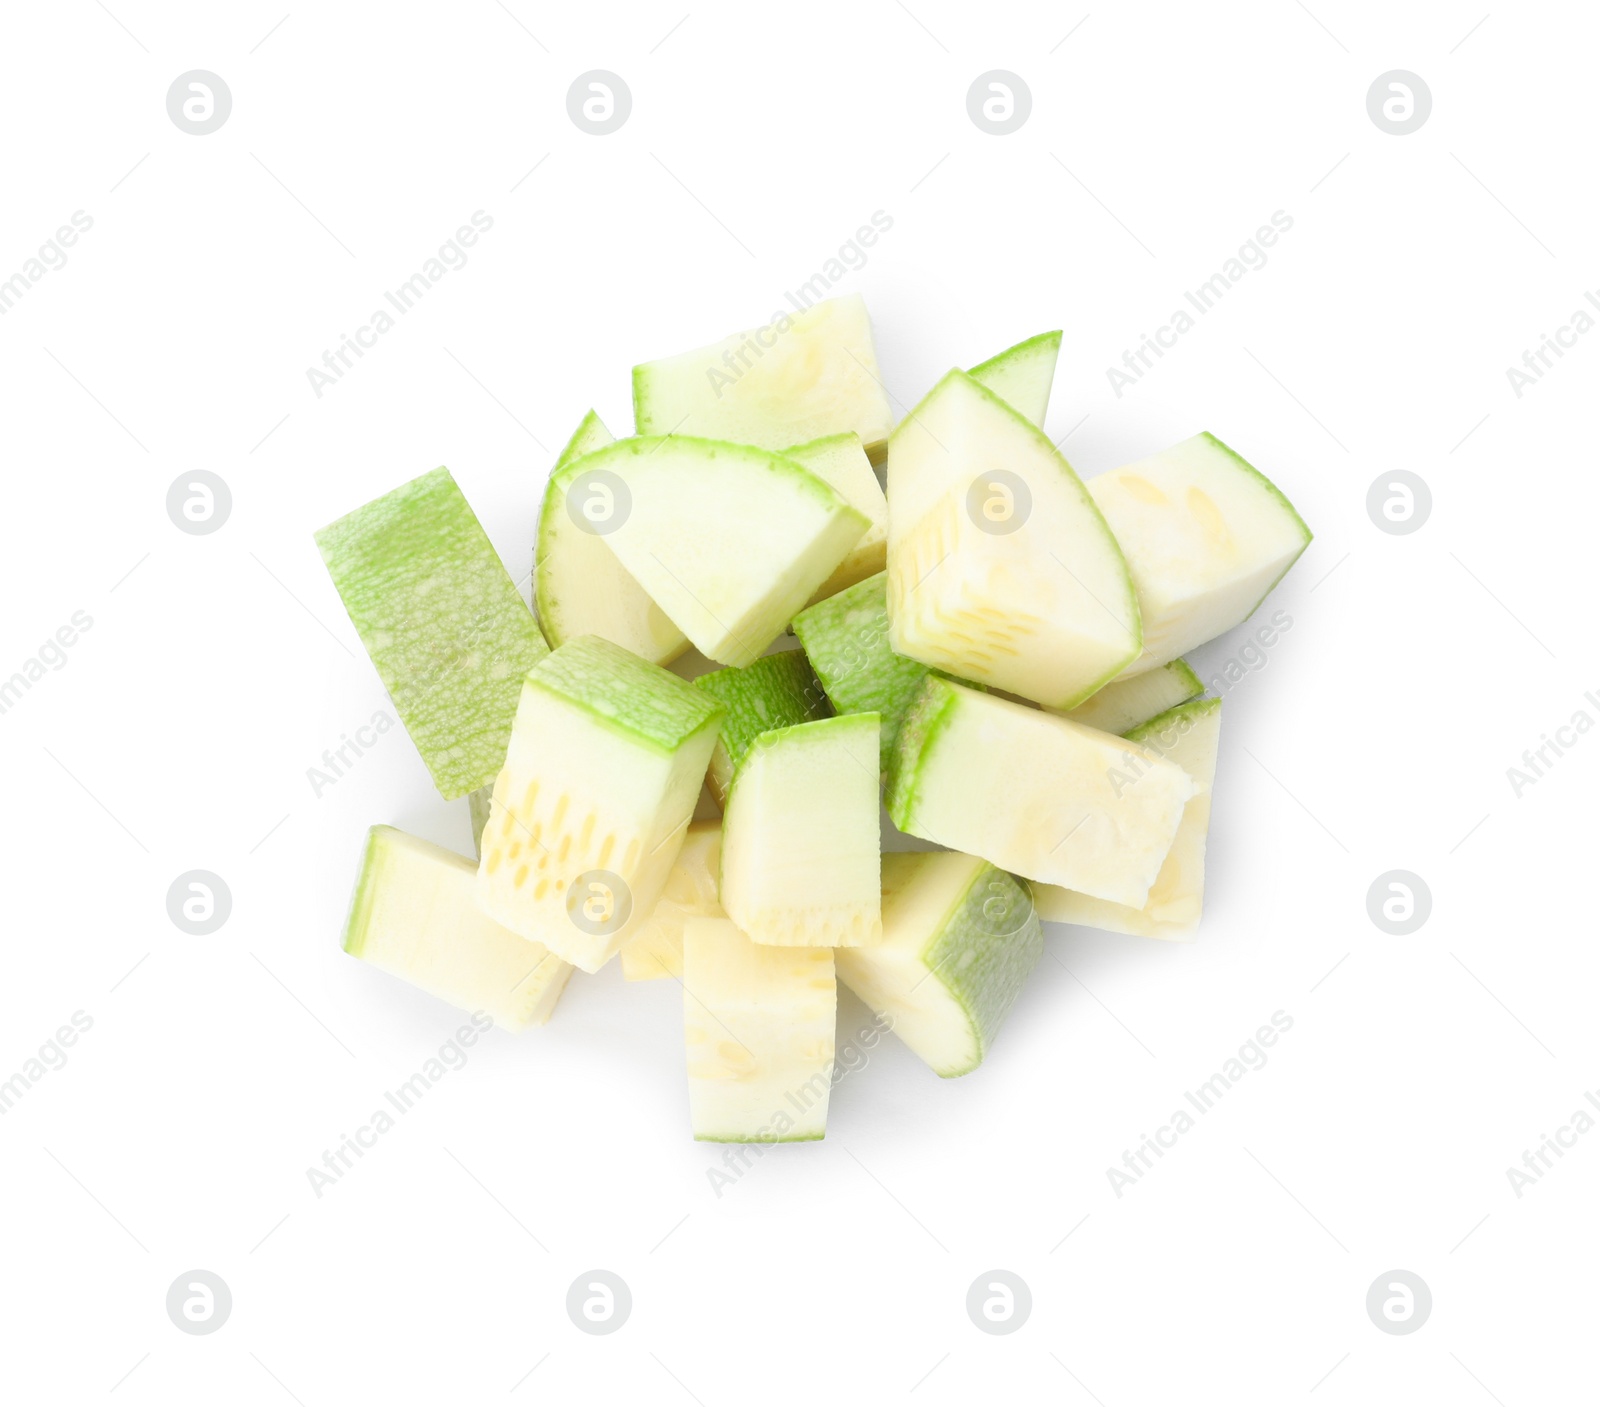 Photo of Pieces of ripe zucchini on white background, top view